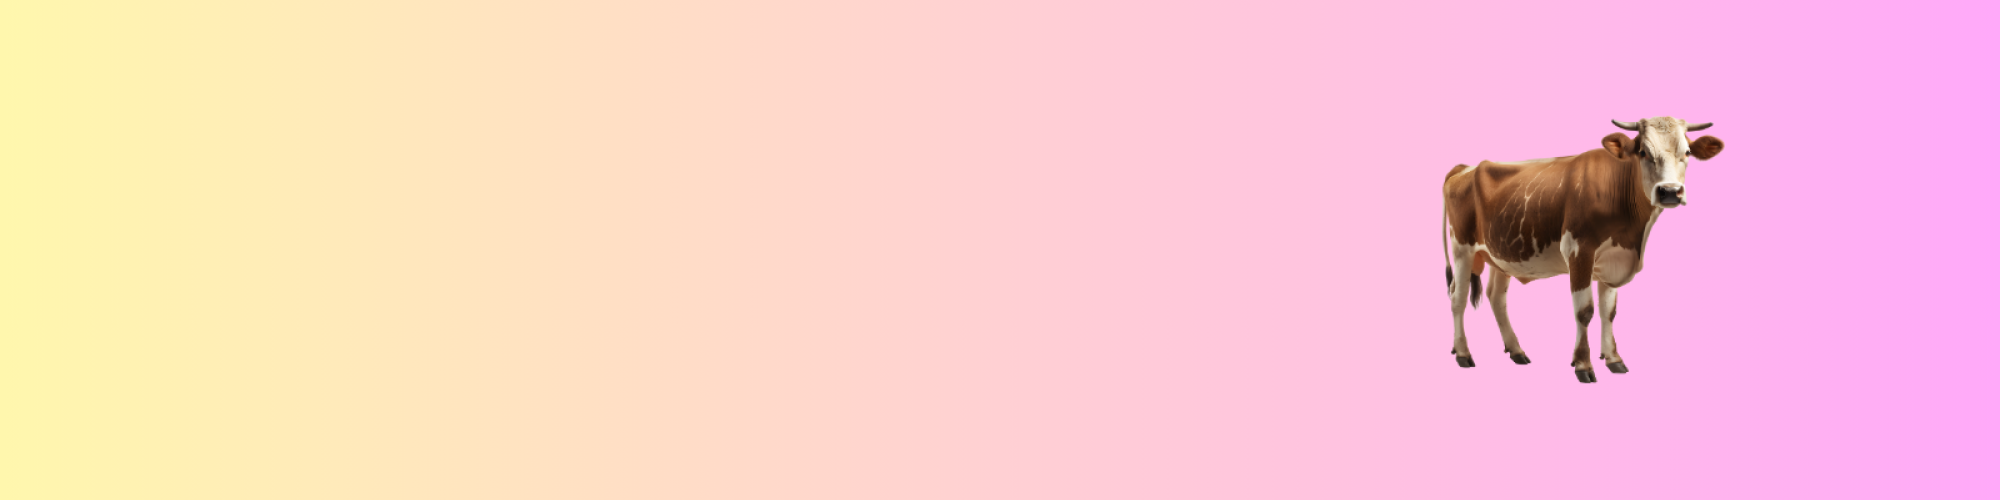 A gradient background of yellow and pink with a brown cow on the right side.